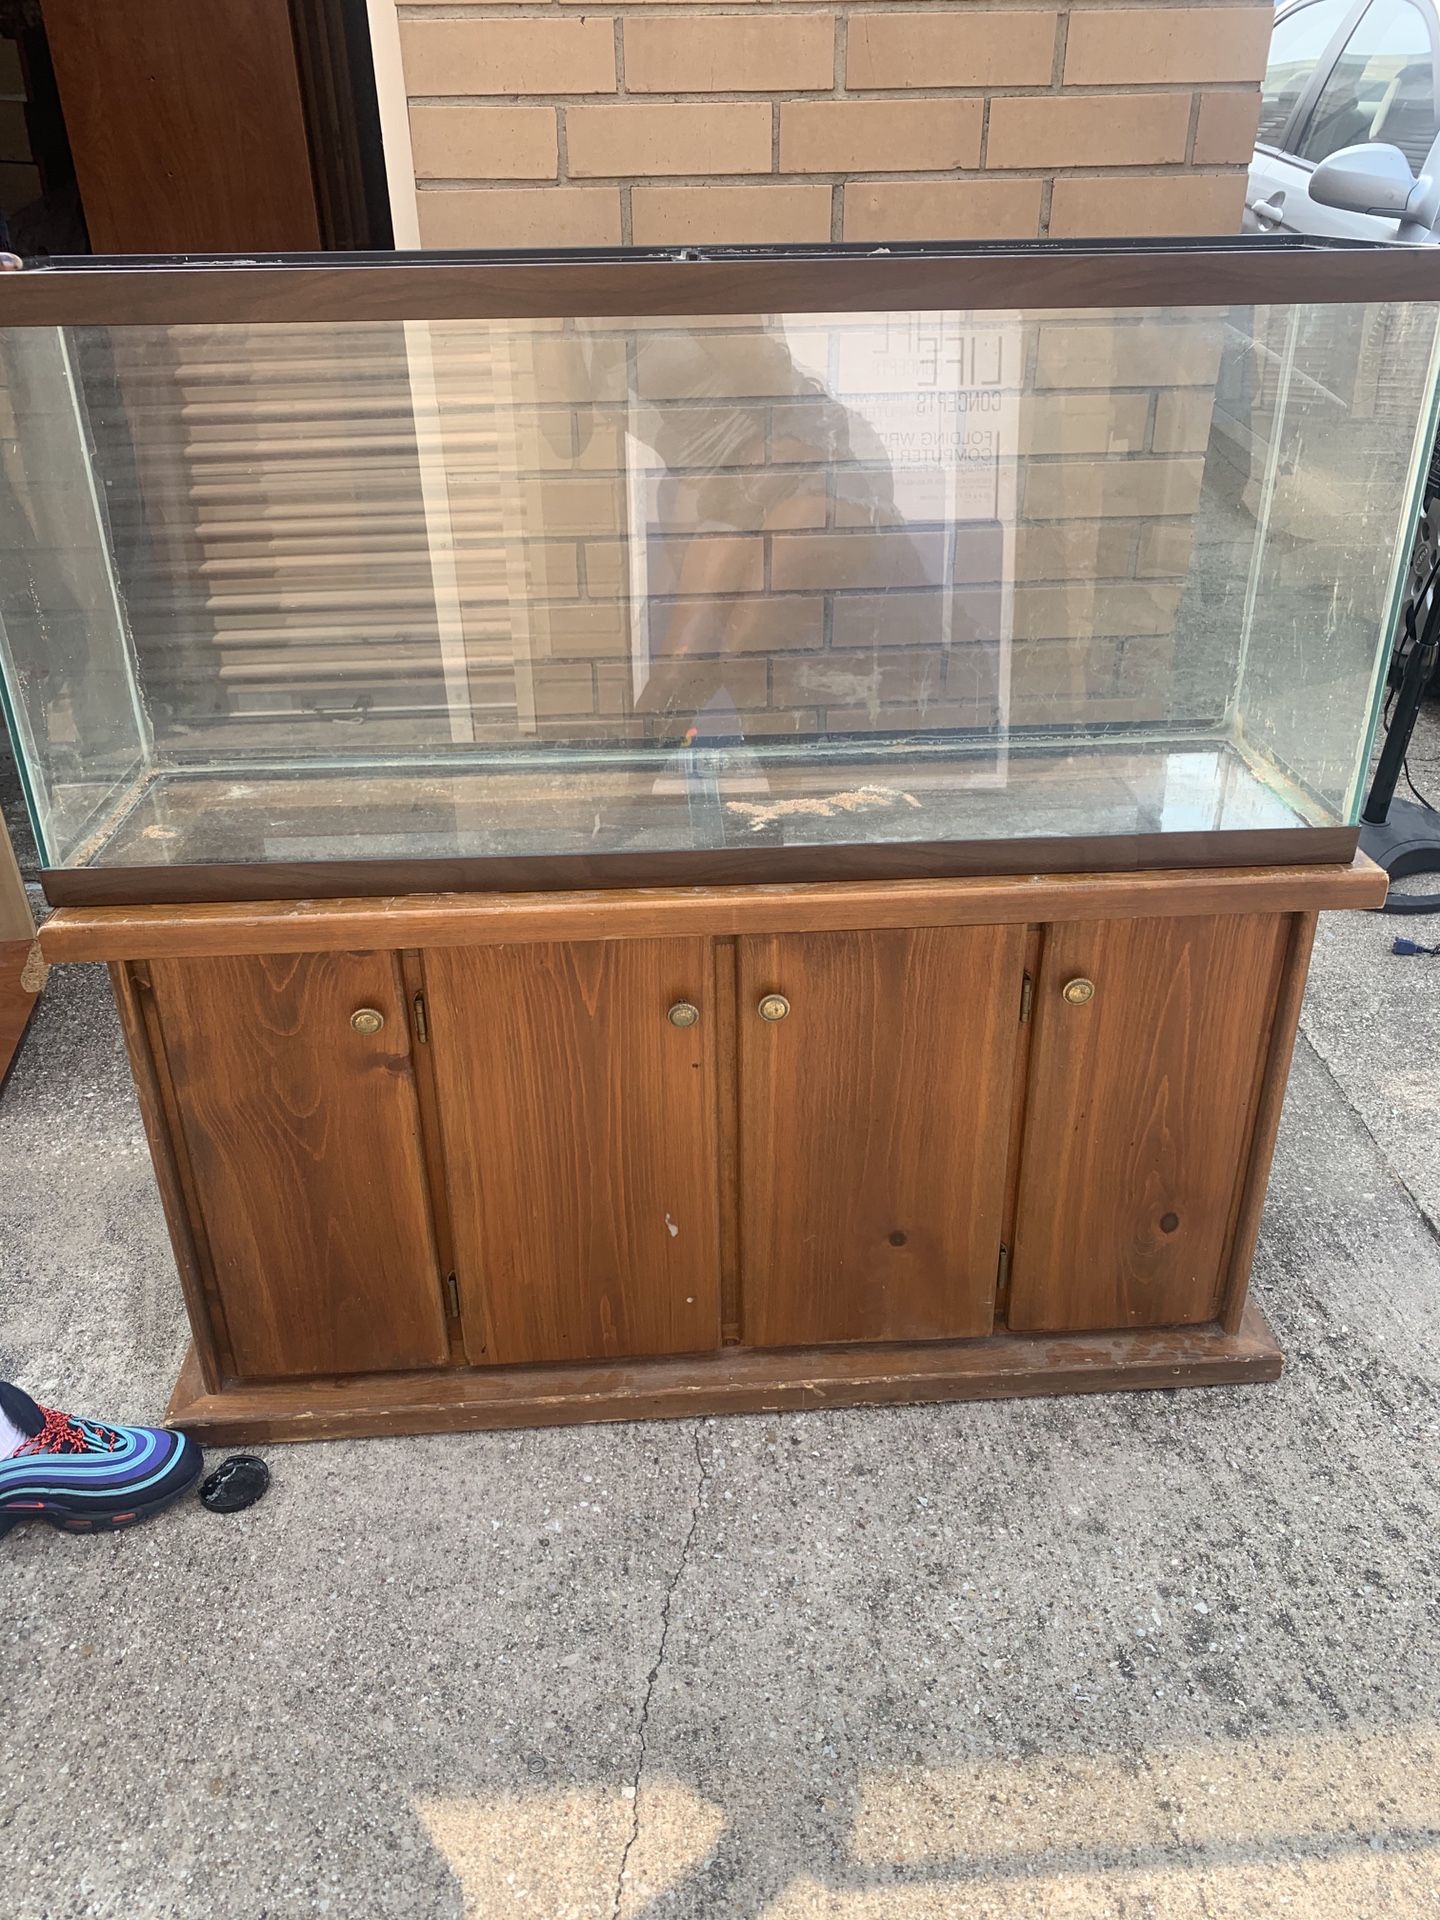 Fish tank with table